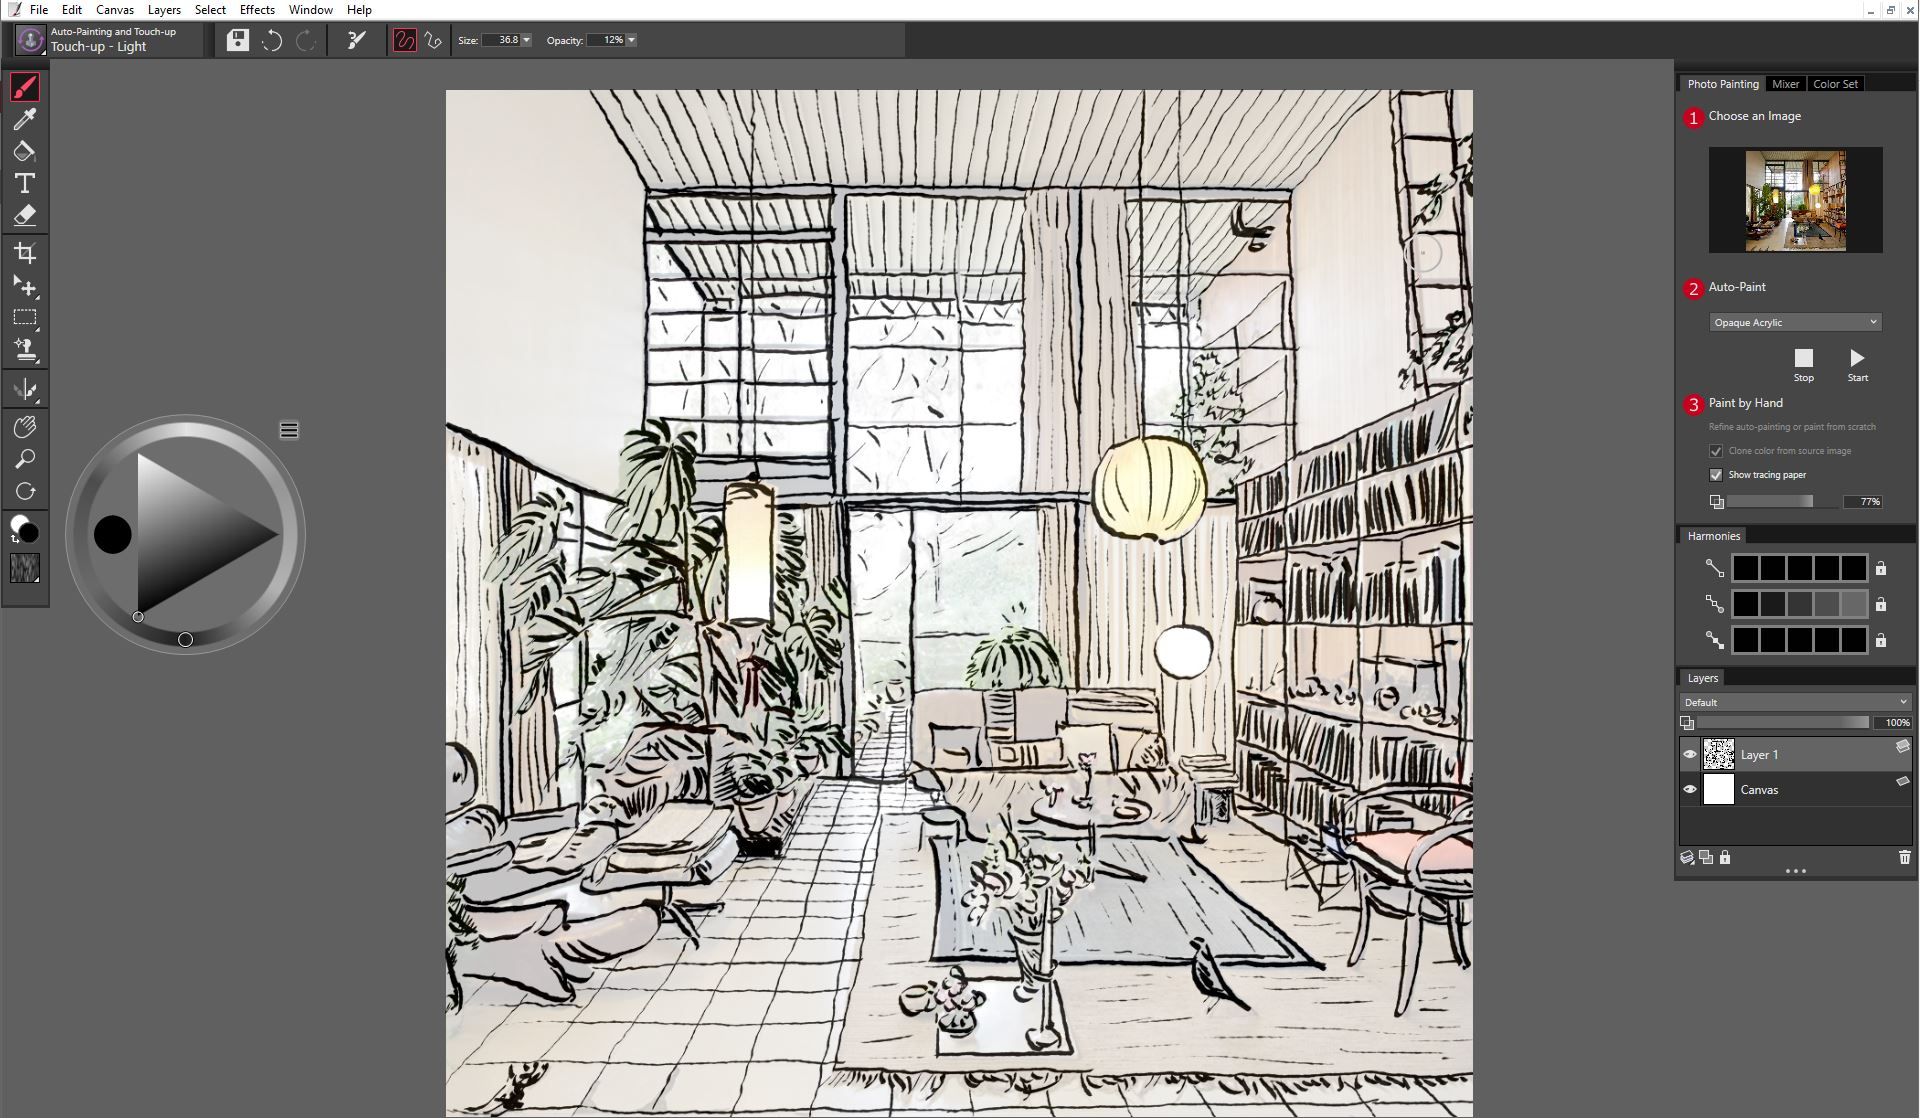 It is the final expected result after this lecture. The image shows traced outlines of the Eames house photo.